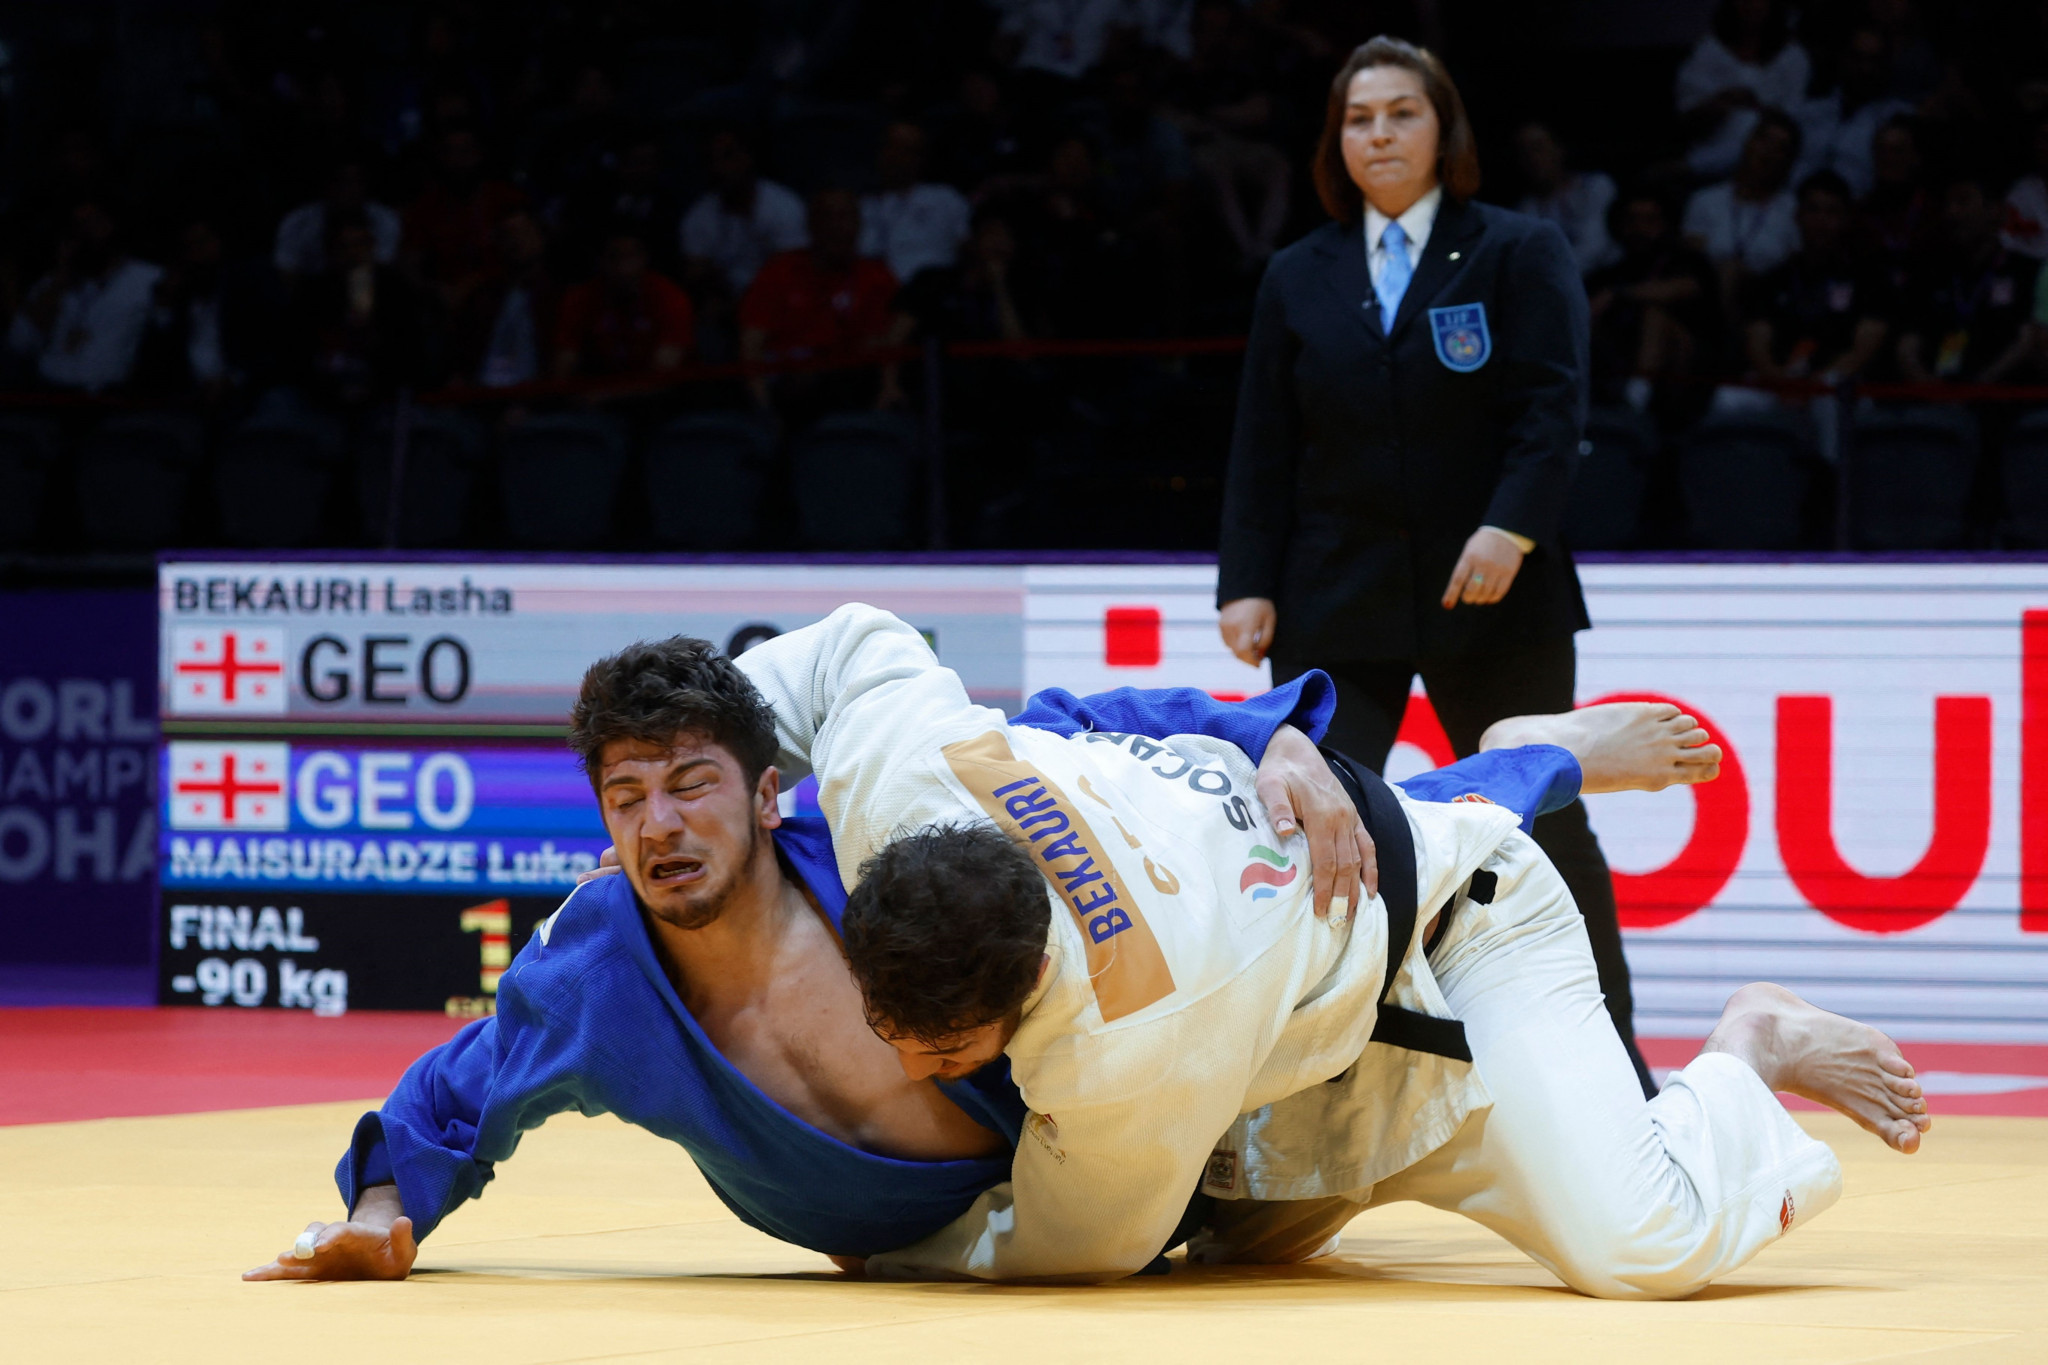 Luka Maisuradze, left, overcame Lasha Bekauri, right, in the first all-Georgian final at a World Judo Championships ©Getty Images